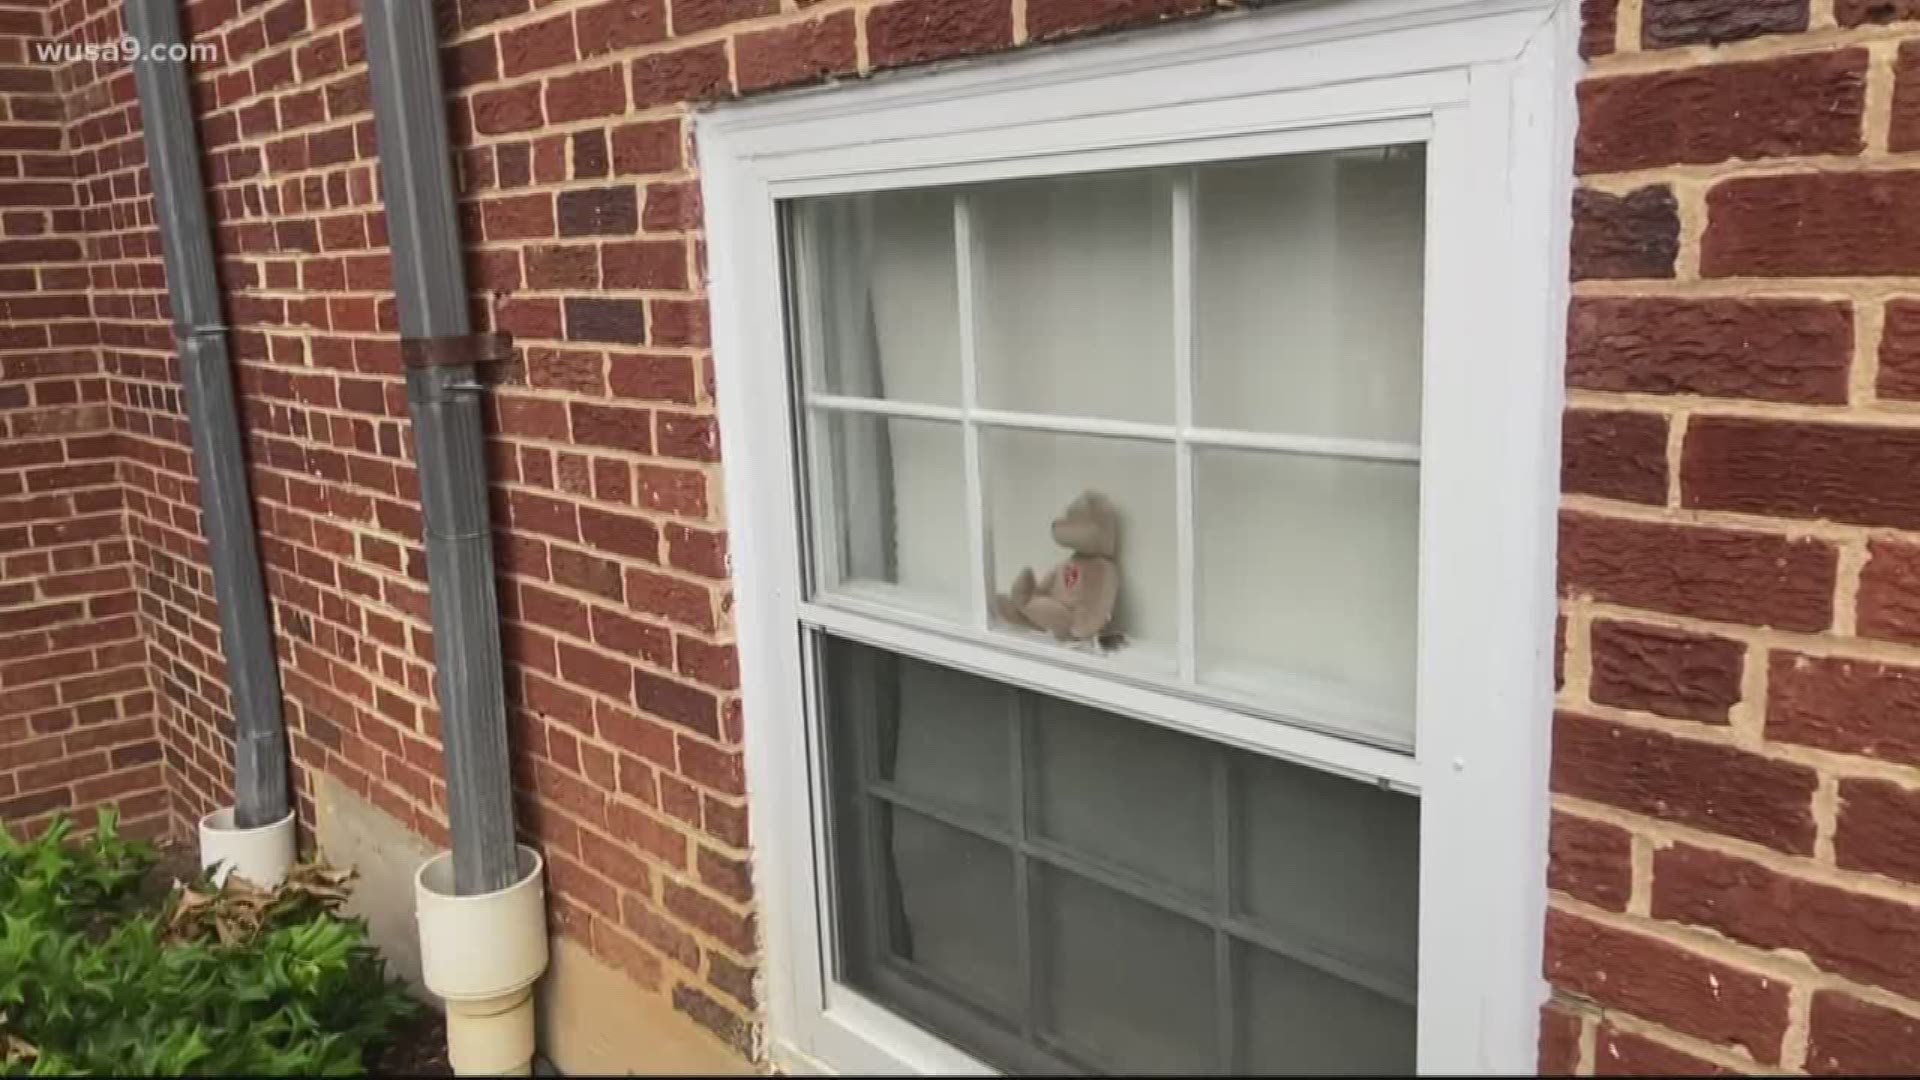 McLean Gardens residents are placing bears in their windows for locals to search for... at safe social distances.